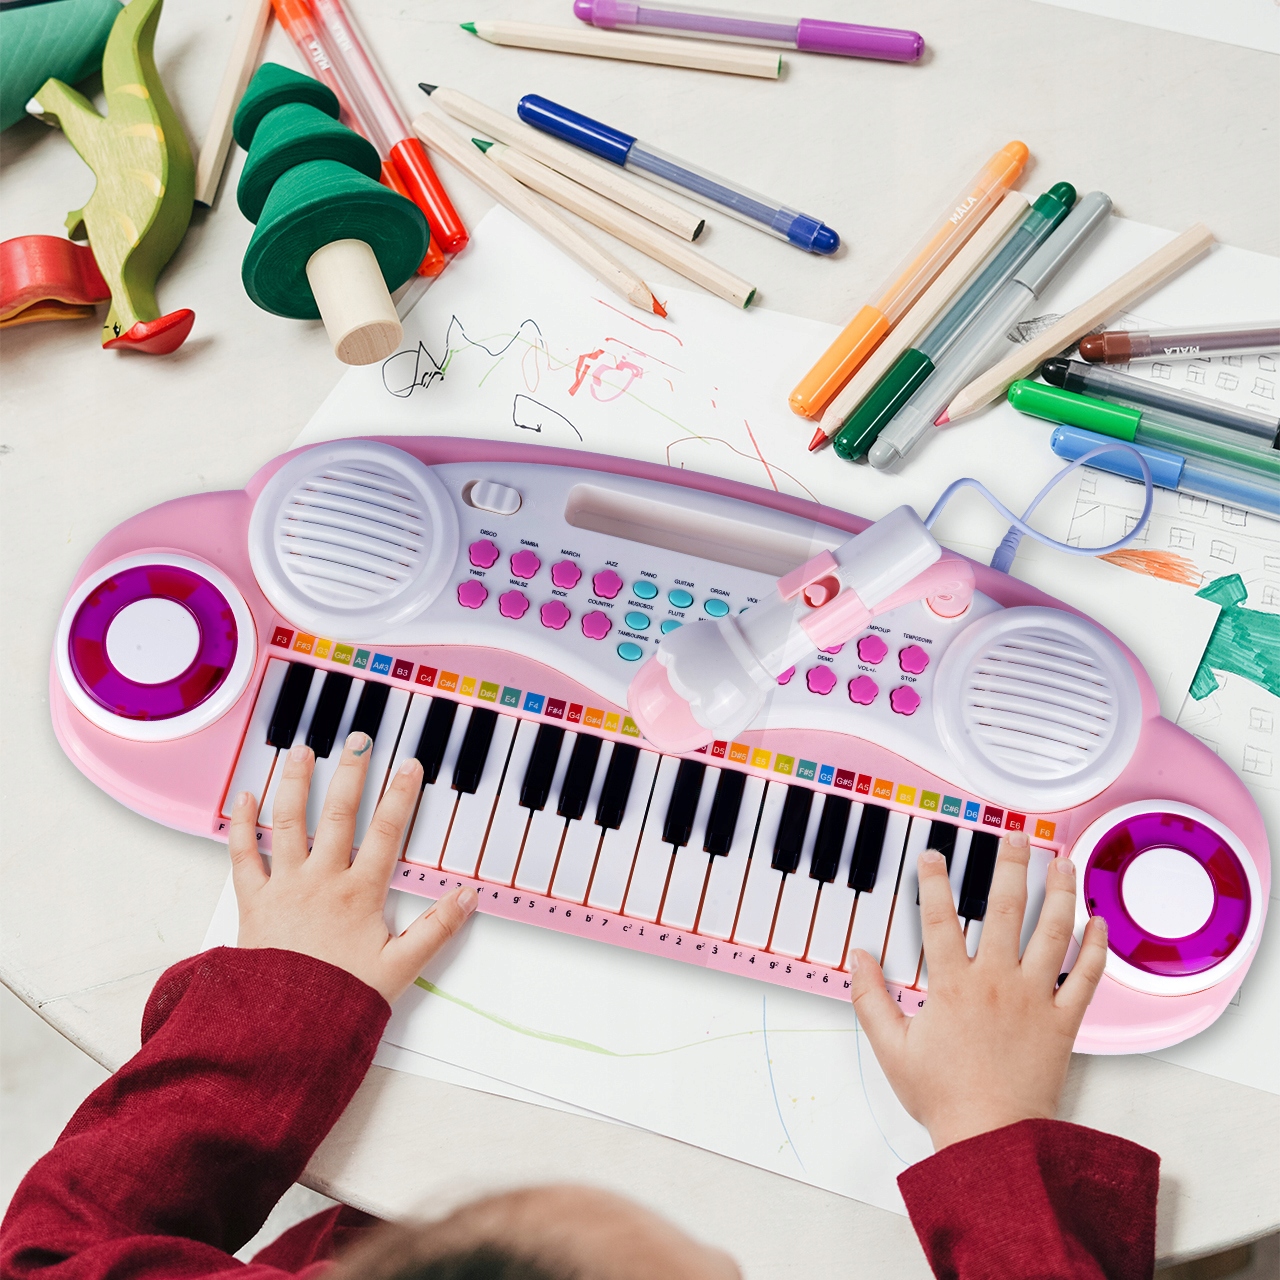 ORGANS 37 KEYS PIANO STOOTLE MP3 KEYBOARD USB MICROPHONE FOR CHILDREN Dominant color multicolor